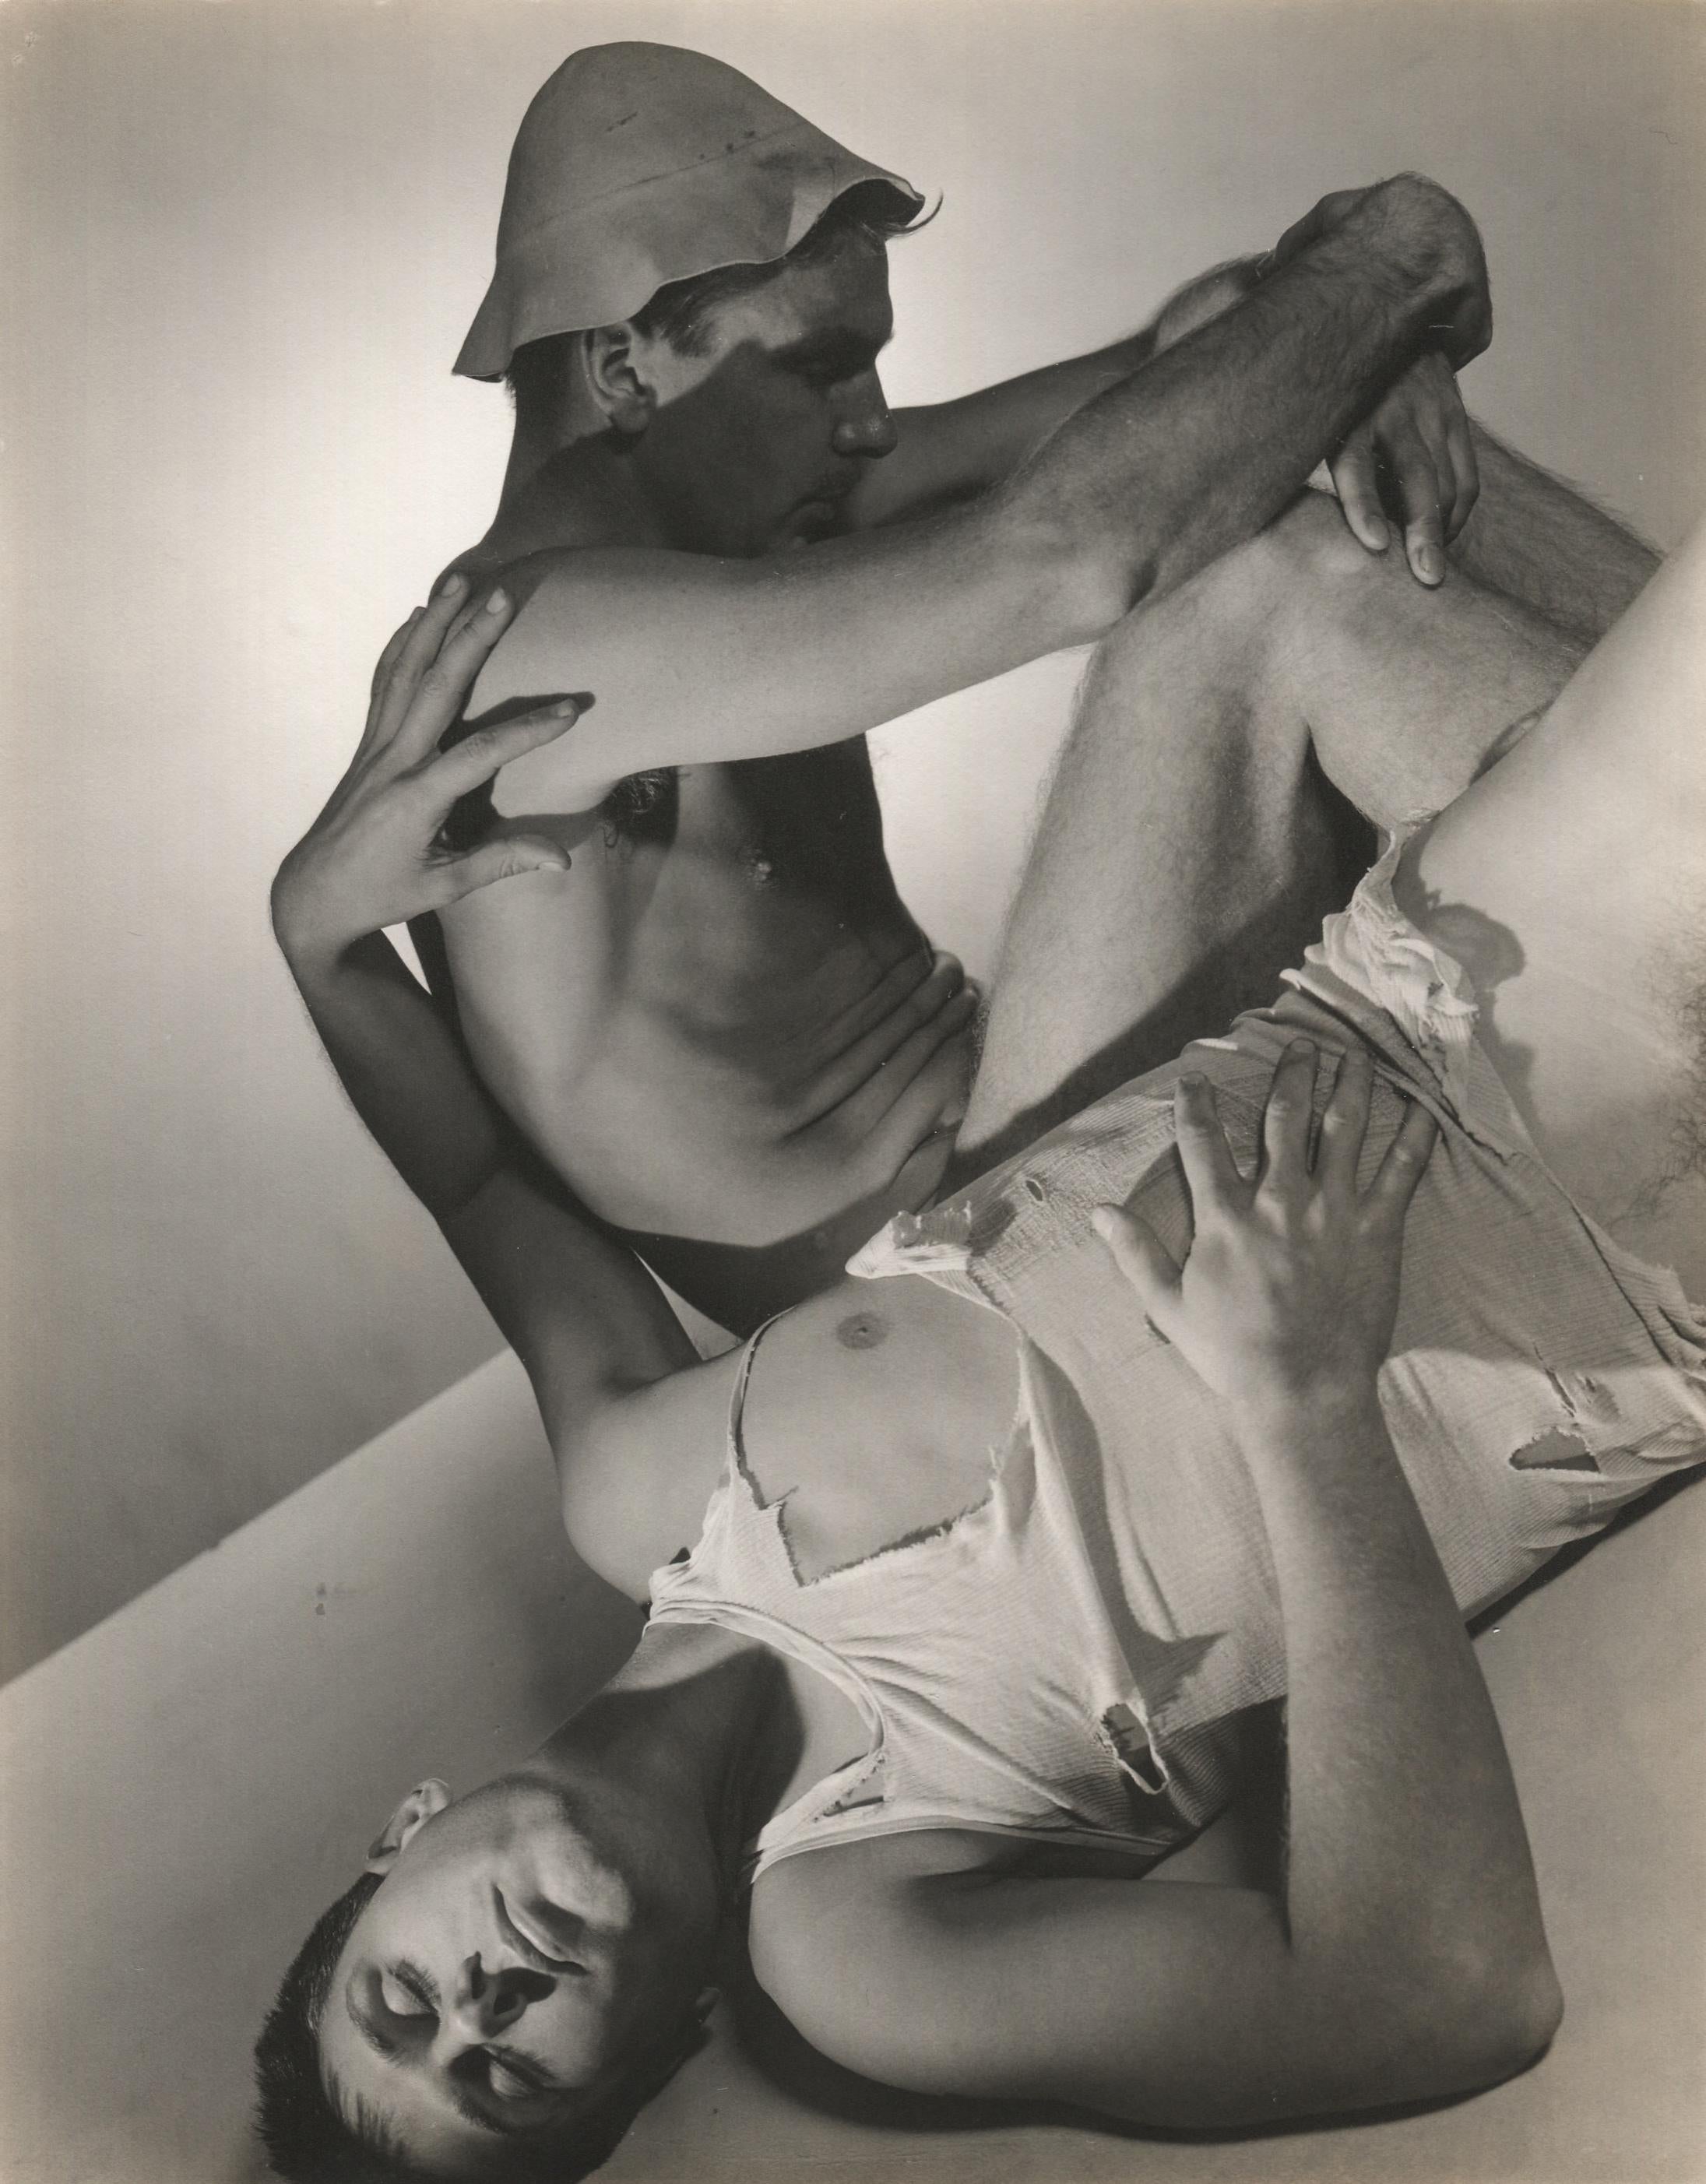 Paul Cadmus in Torn T-Shirt with Jared French - Photograph by George Platt Lynes